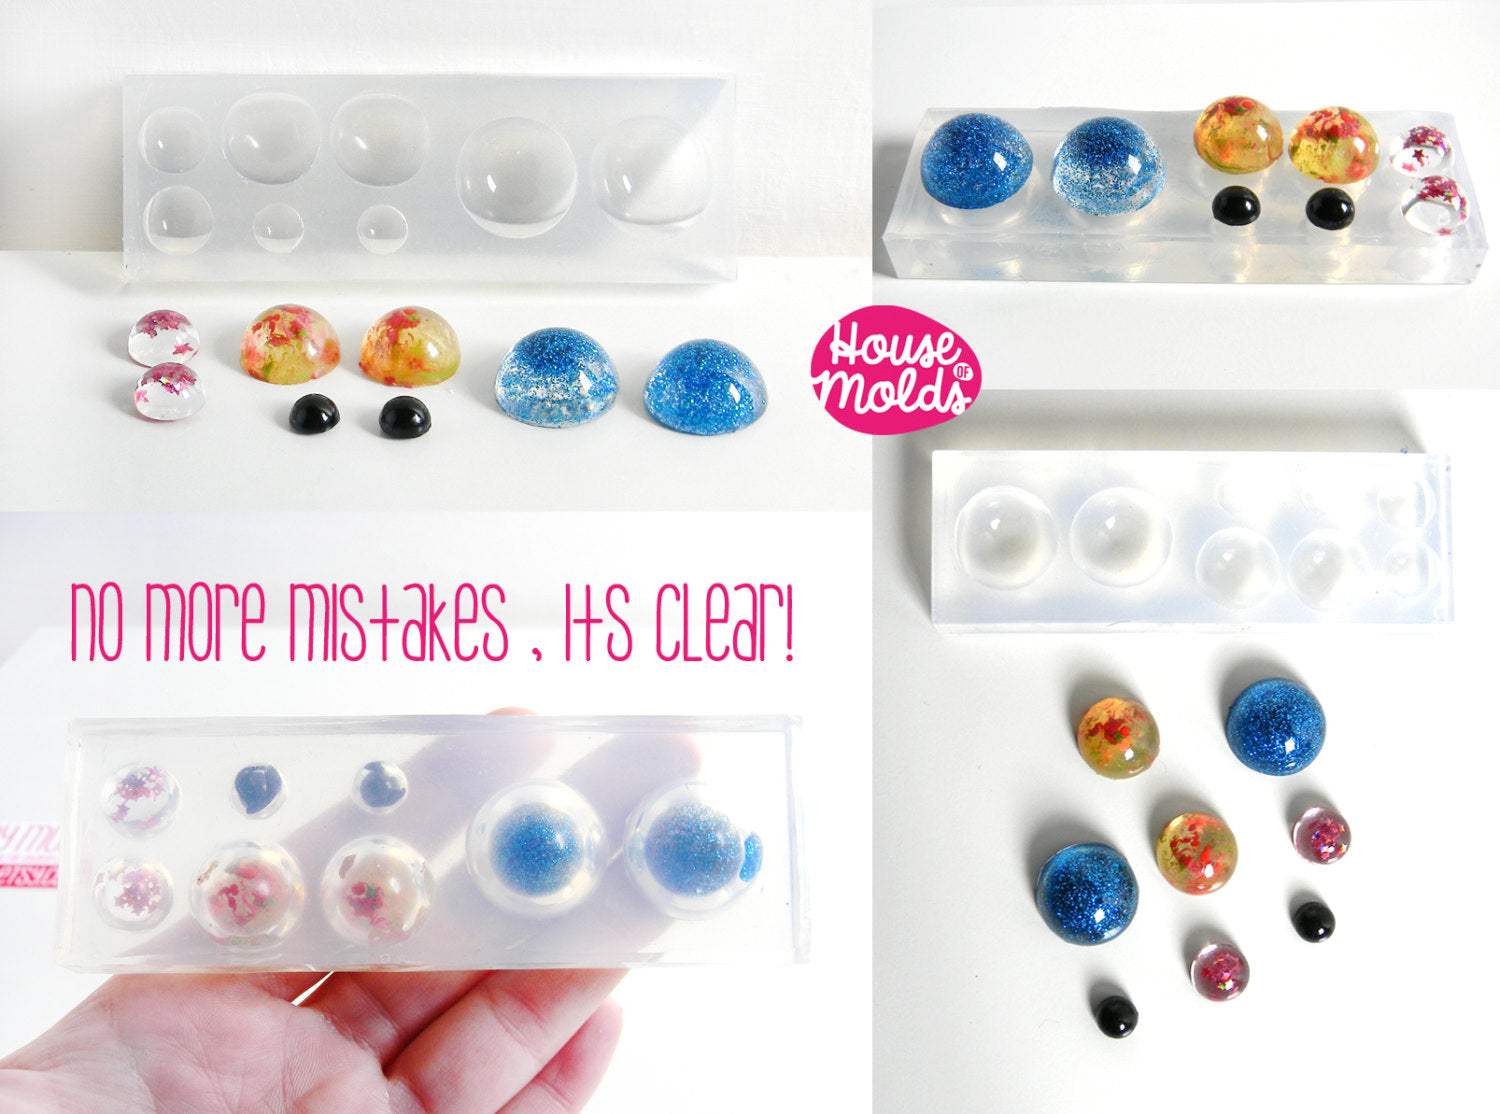 Multisize Cabochons Clear Mold ,4 sizes Cabochons Clear Mold for